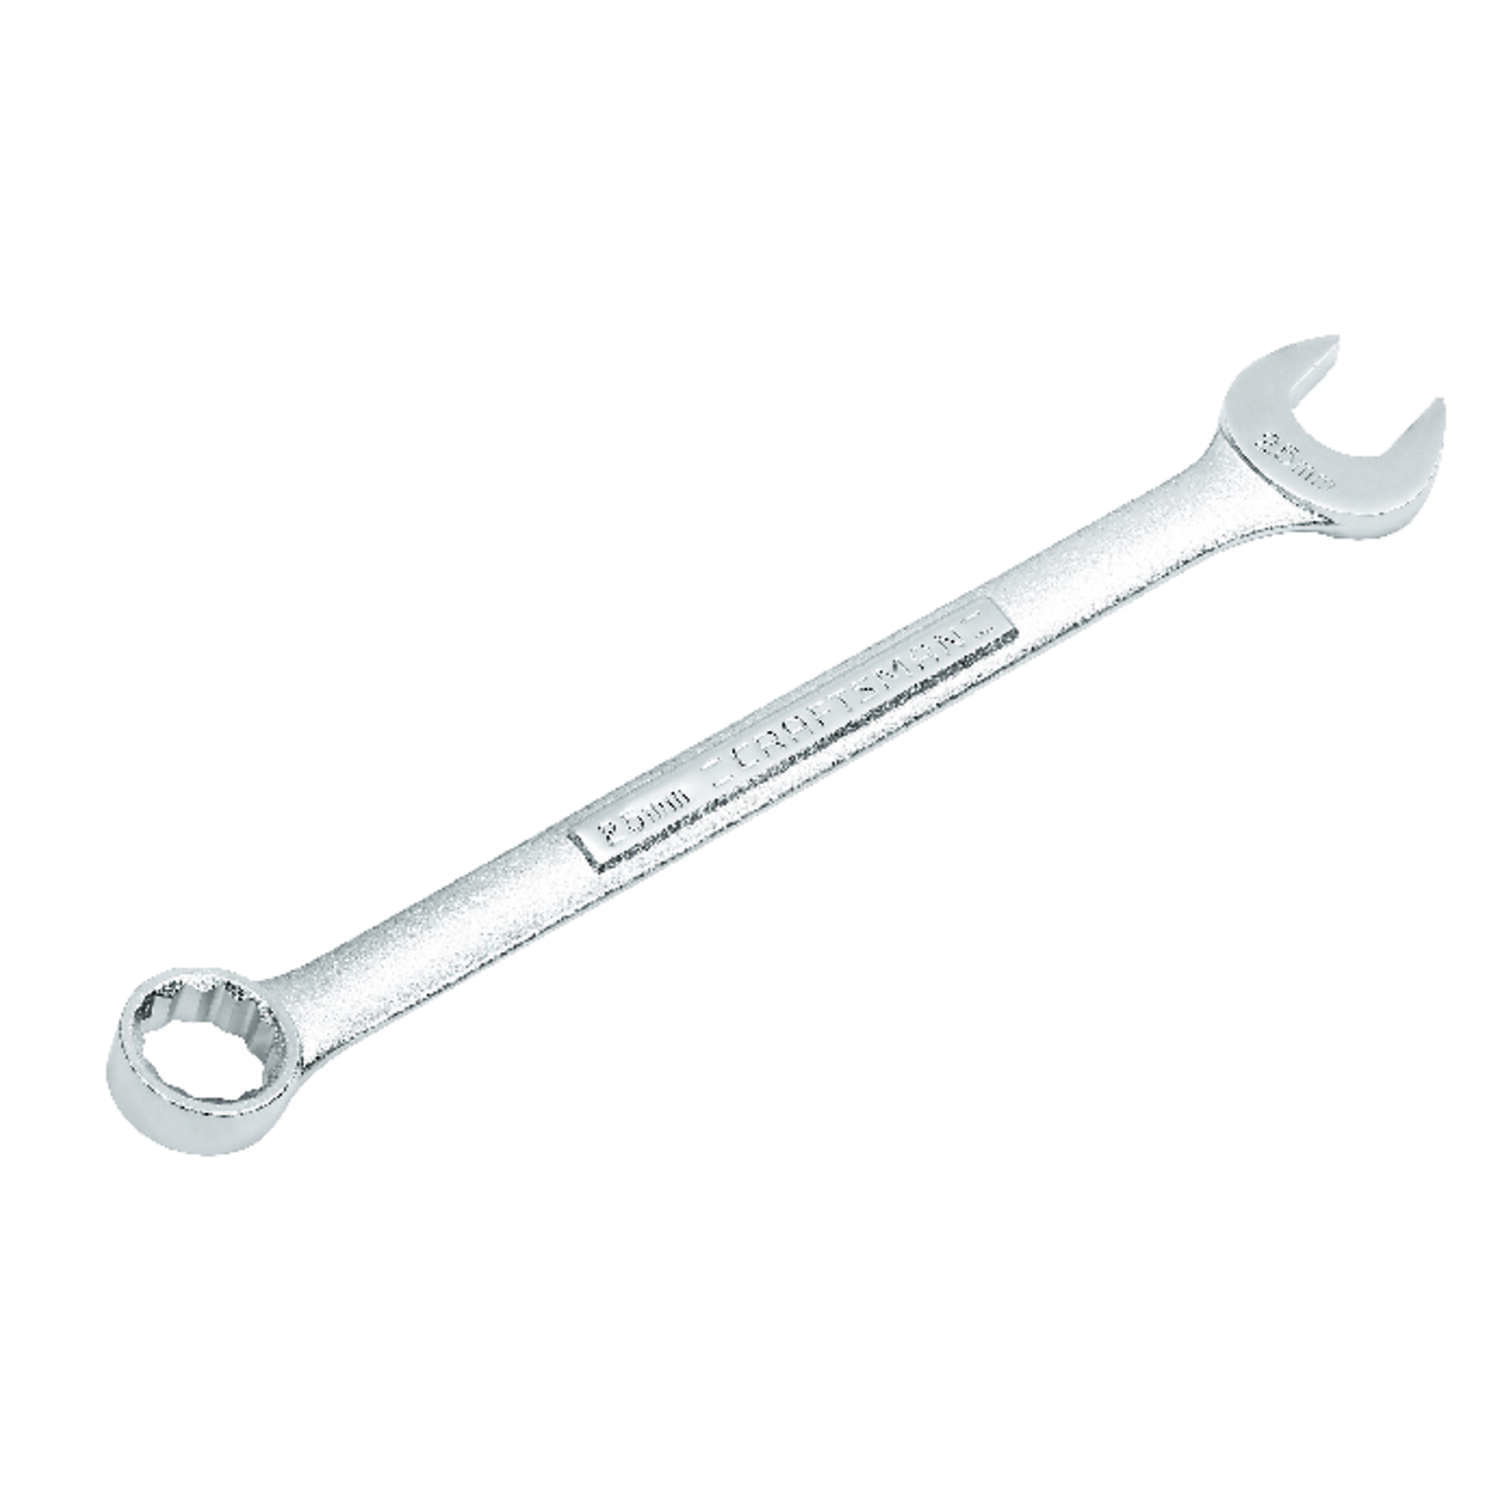 Craftsman 26mm 12 Point Combination Wrench Alloy Steel for sale online 